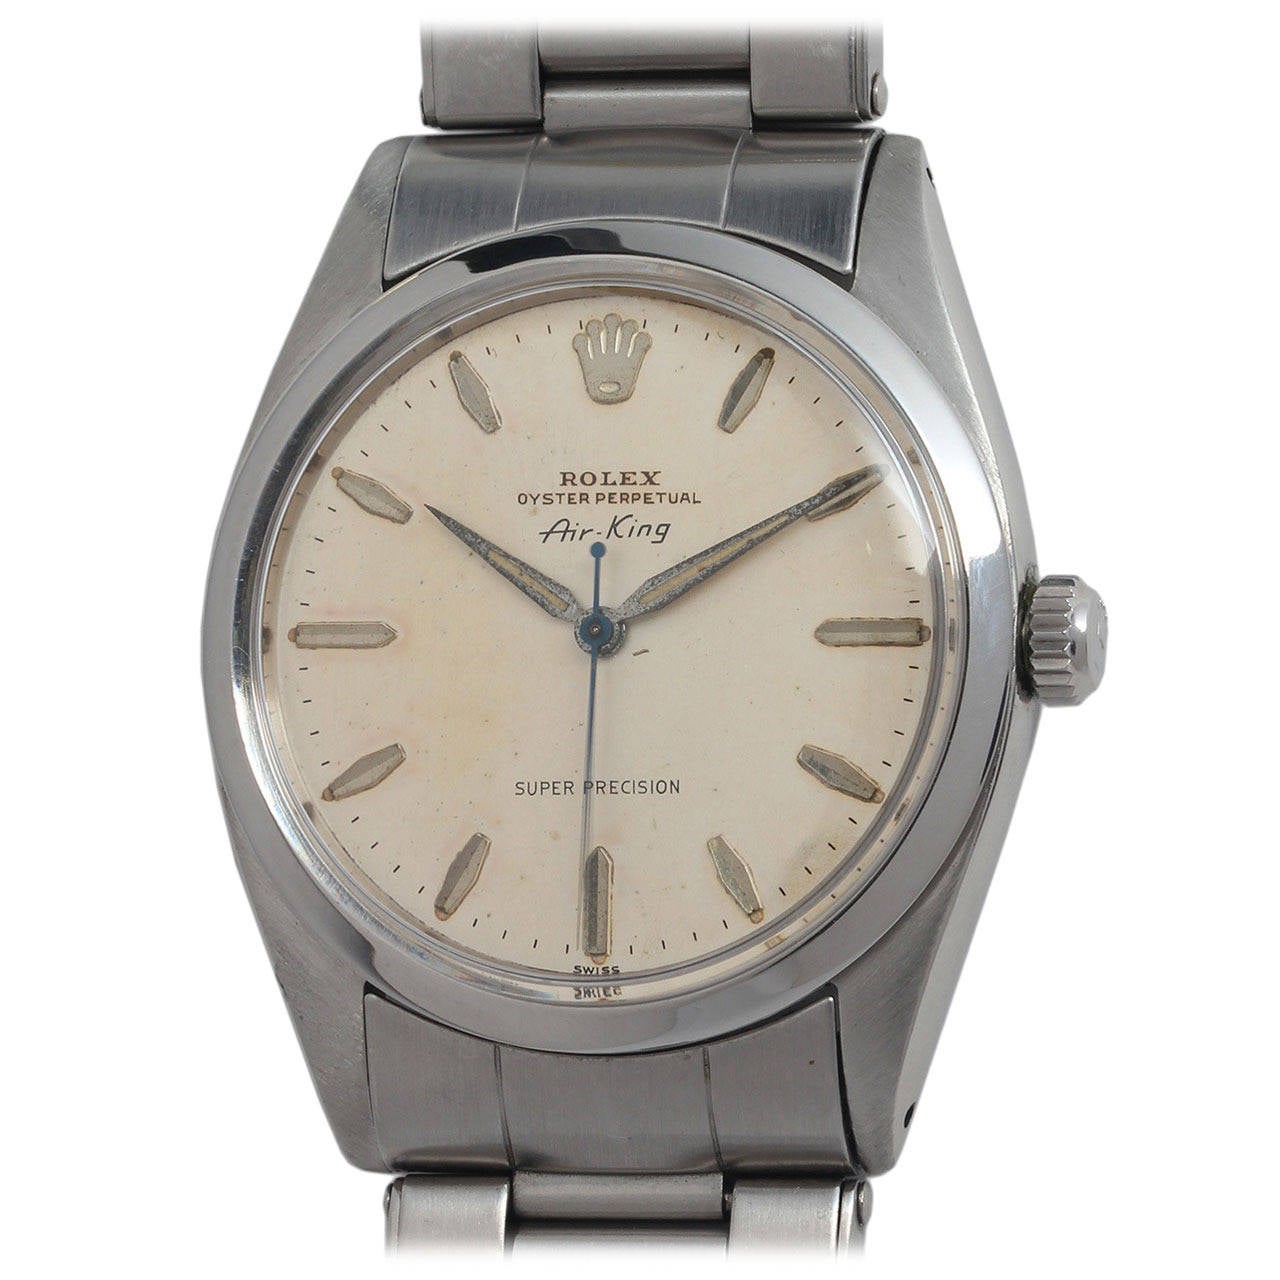 Rolex Stainless Steel Oyster Perpetual Air-King Wristwatch Ref 5504